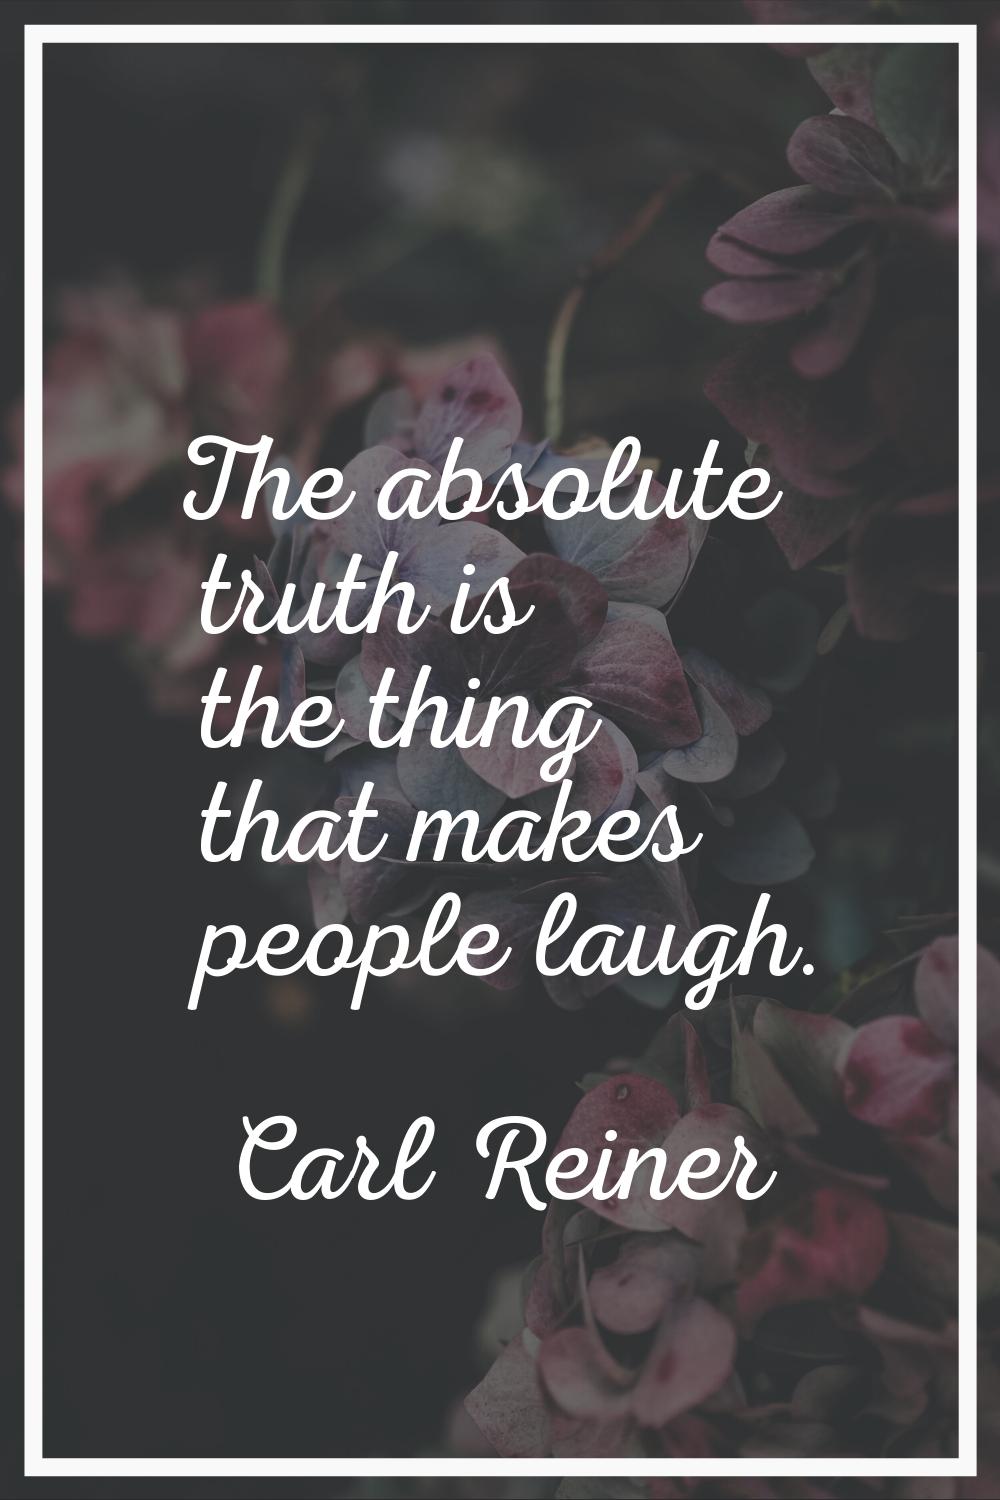 The absolute truth is the thing that makes people laugh.